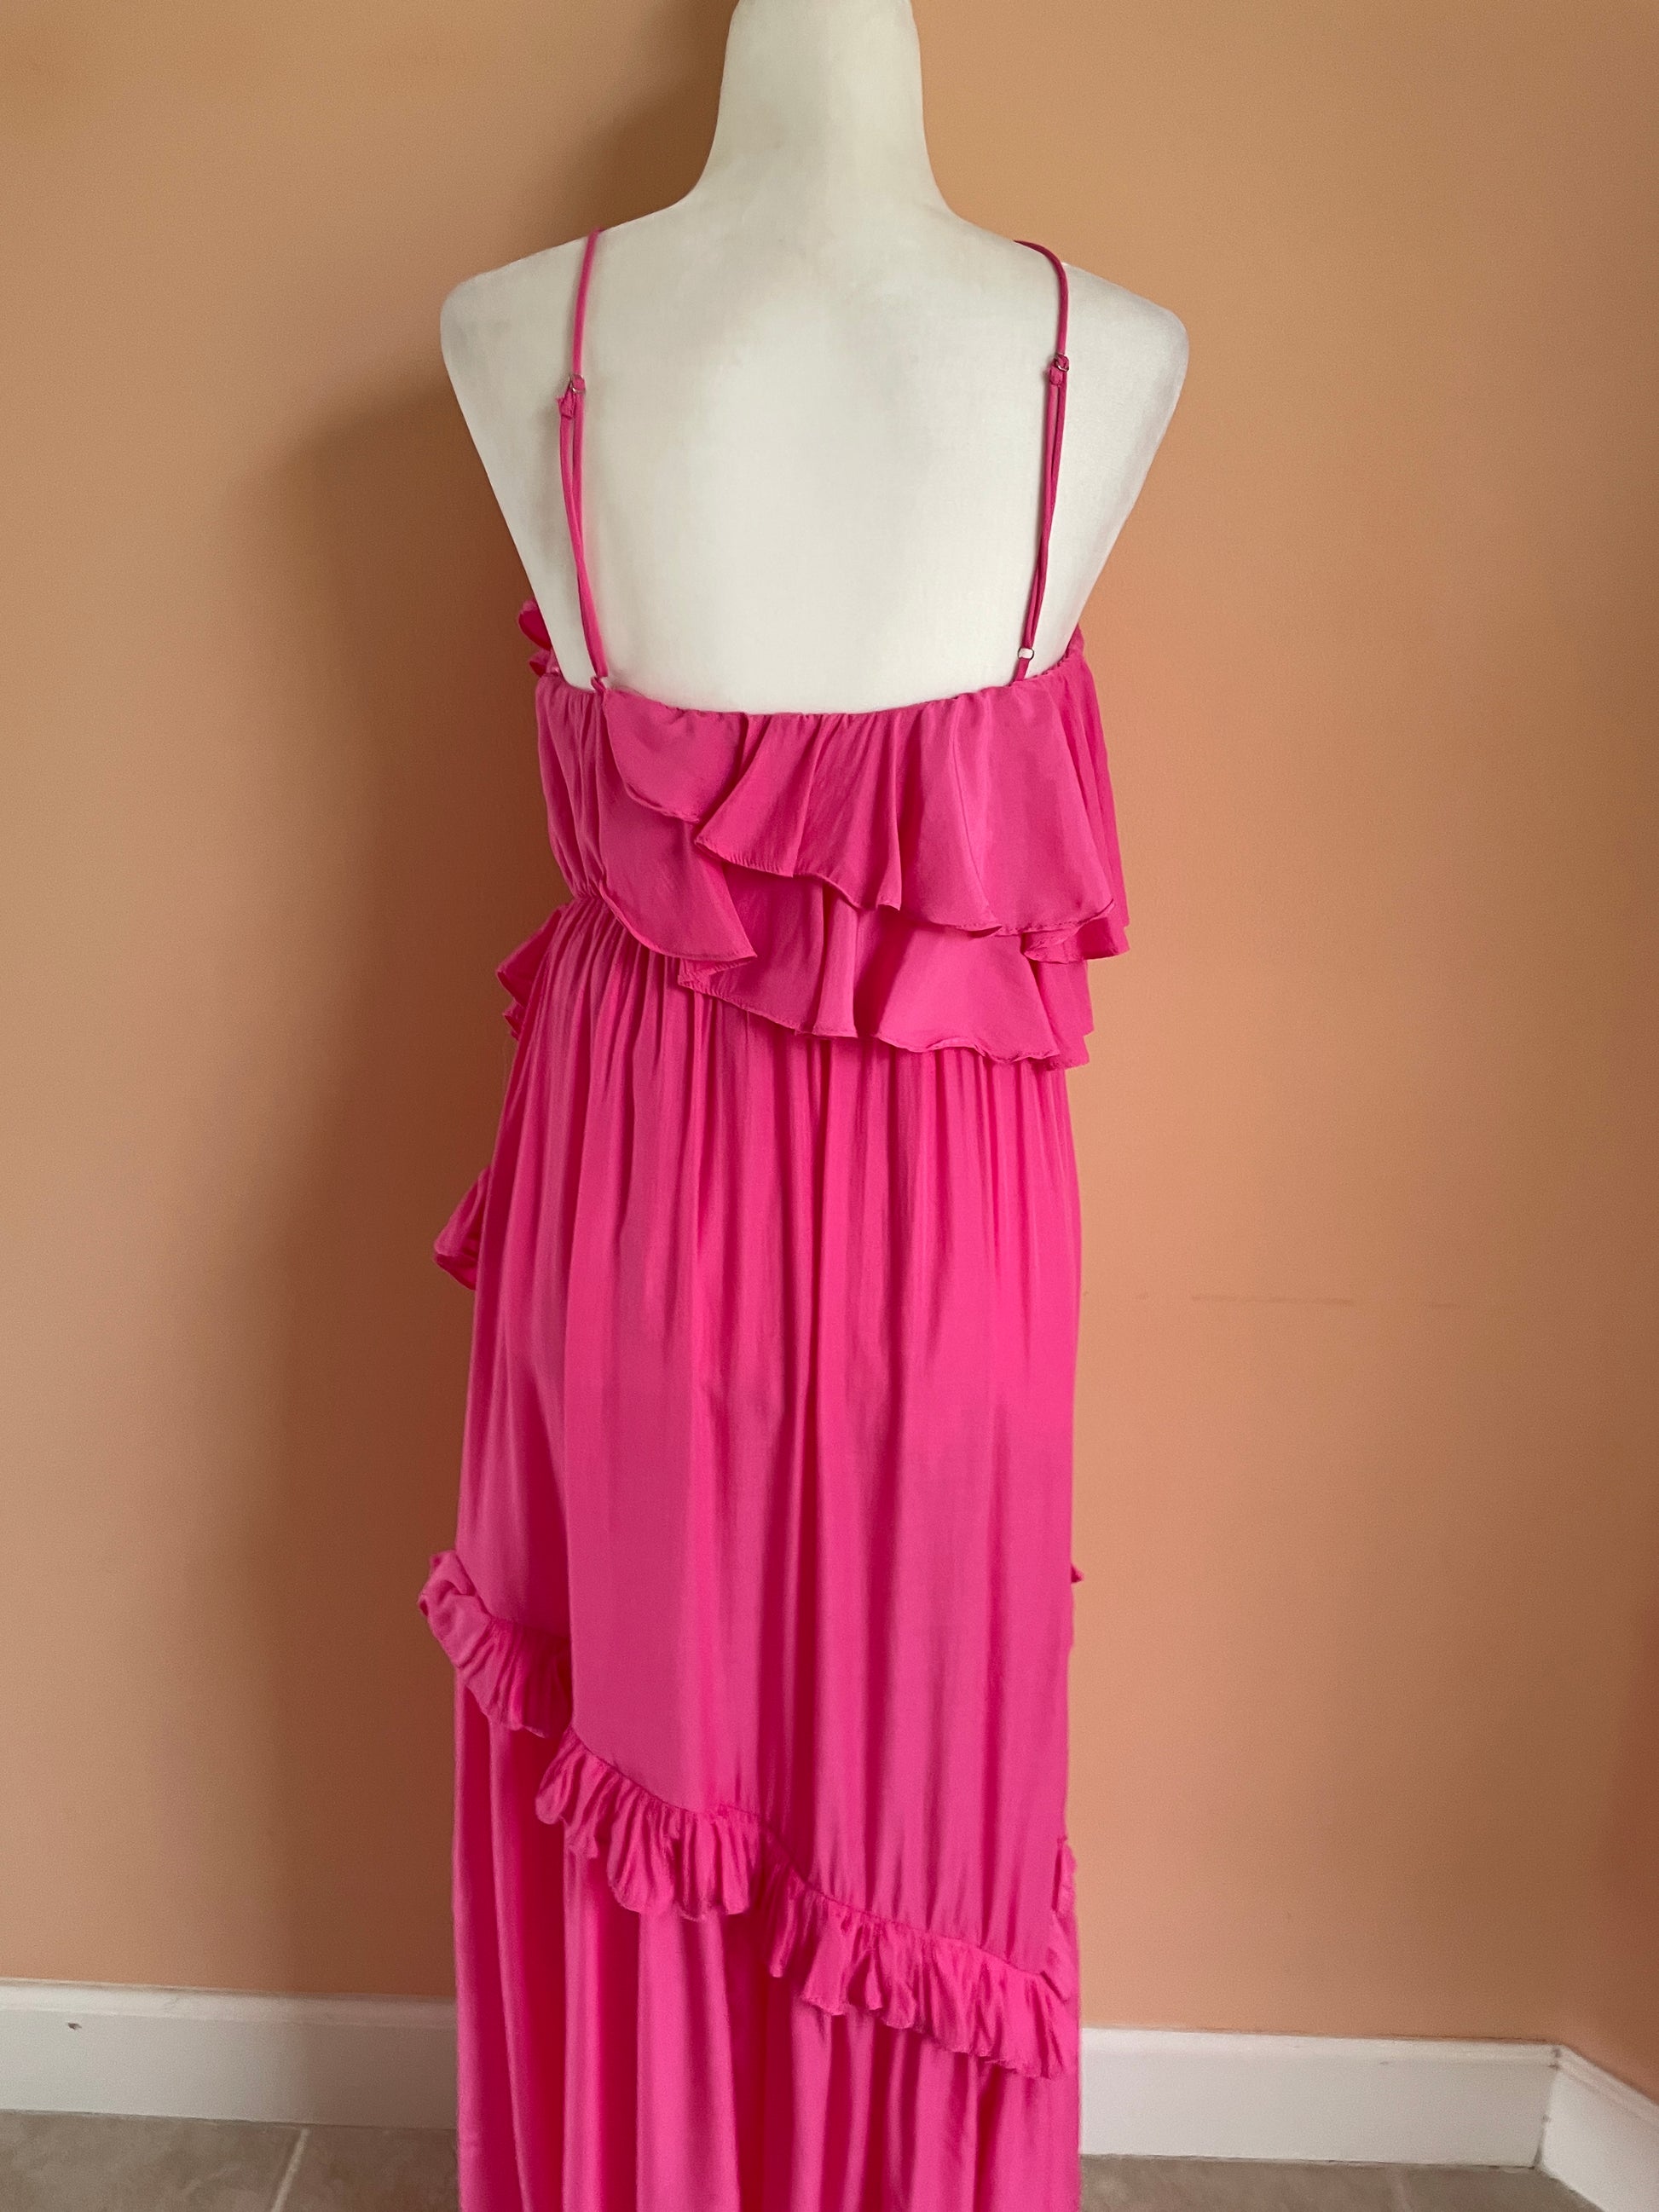  2000s  Pretty Tiered Ruffles Cold Shoulder High Low Pink You Got What it Takes Long Dress S